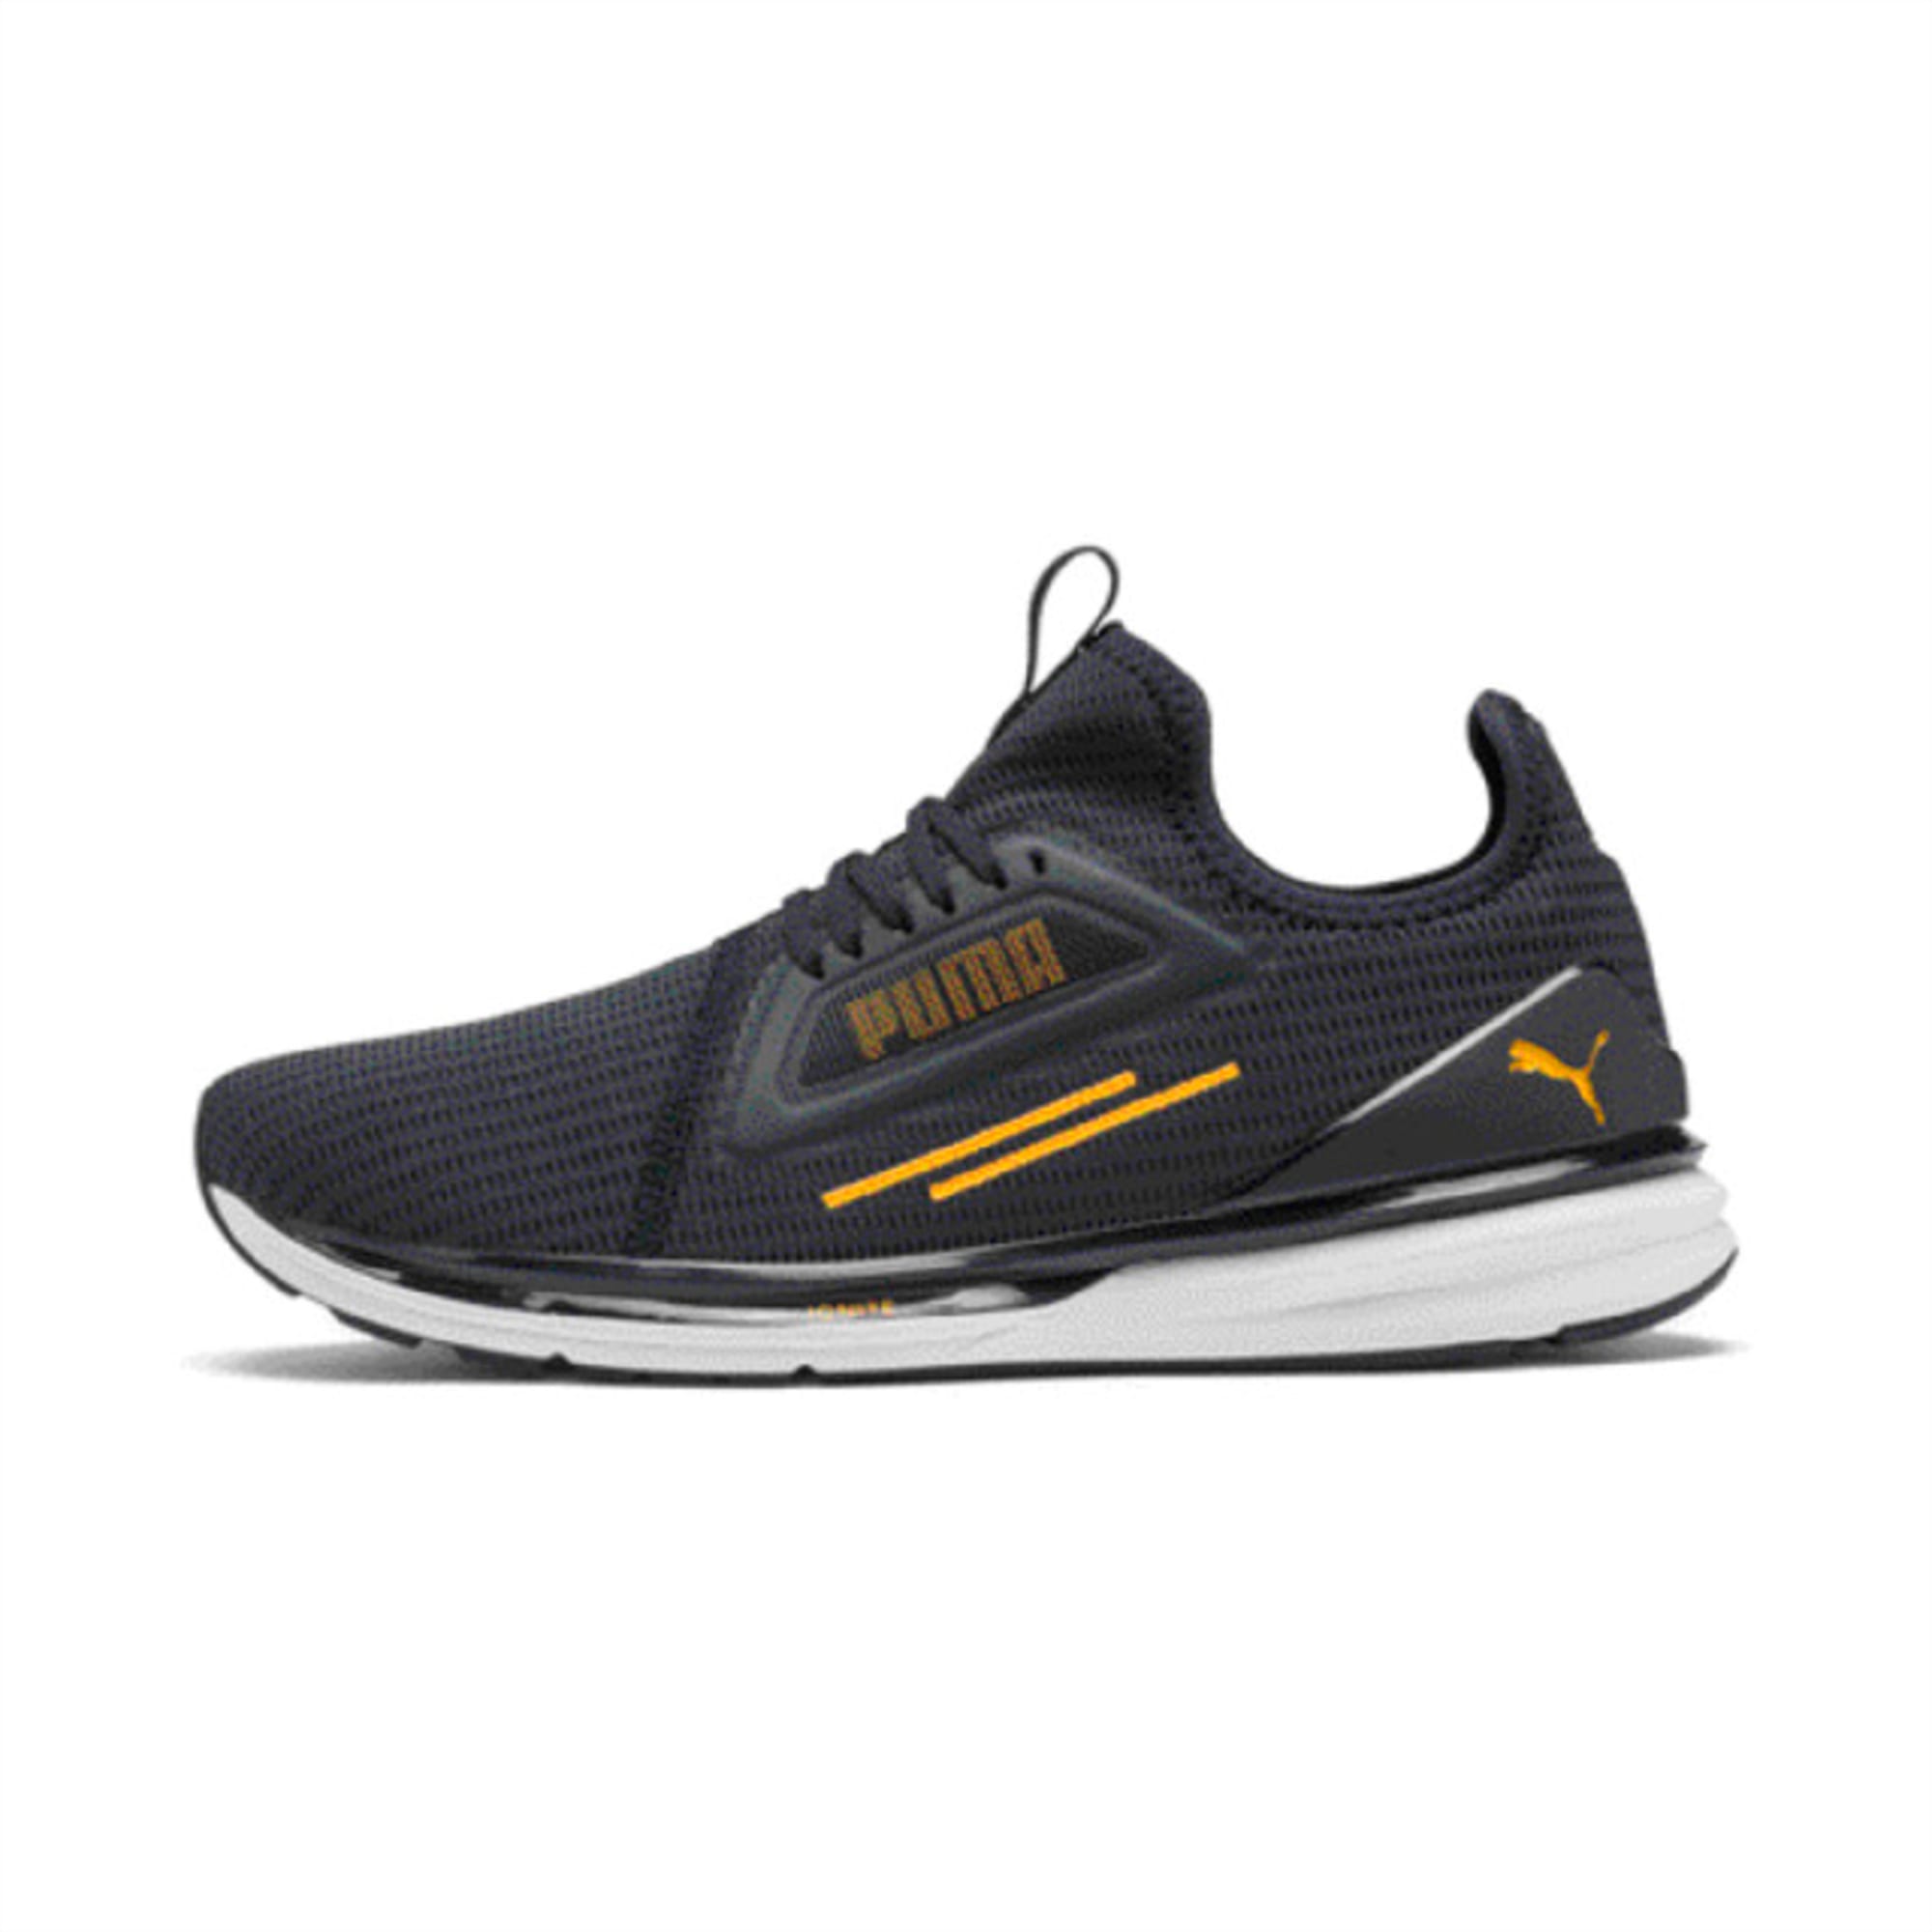 IGNITE Limitless Lean Running Shoes 